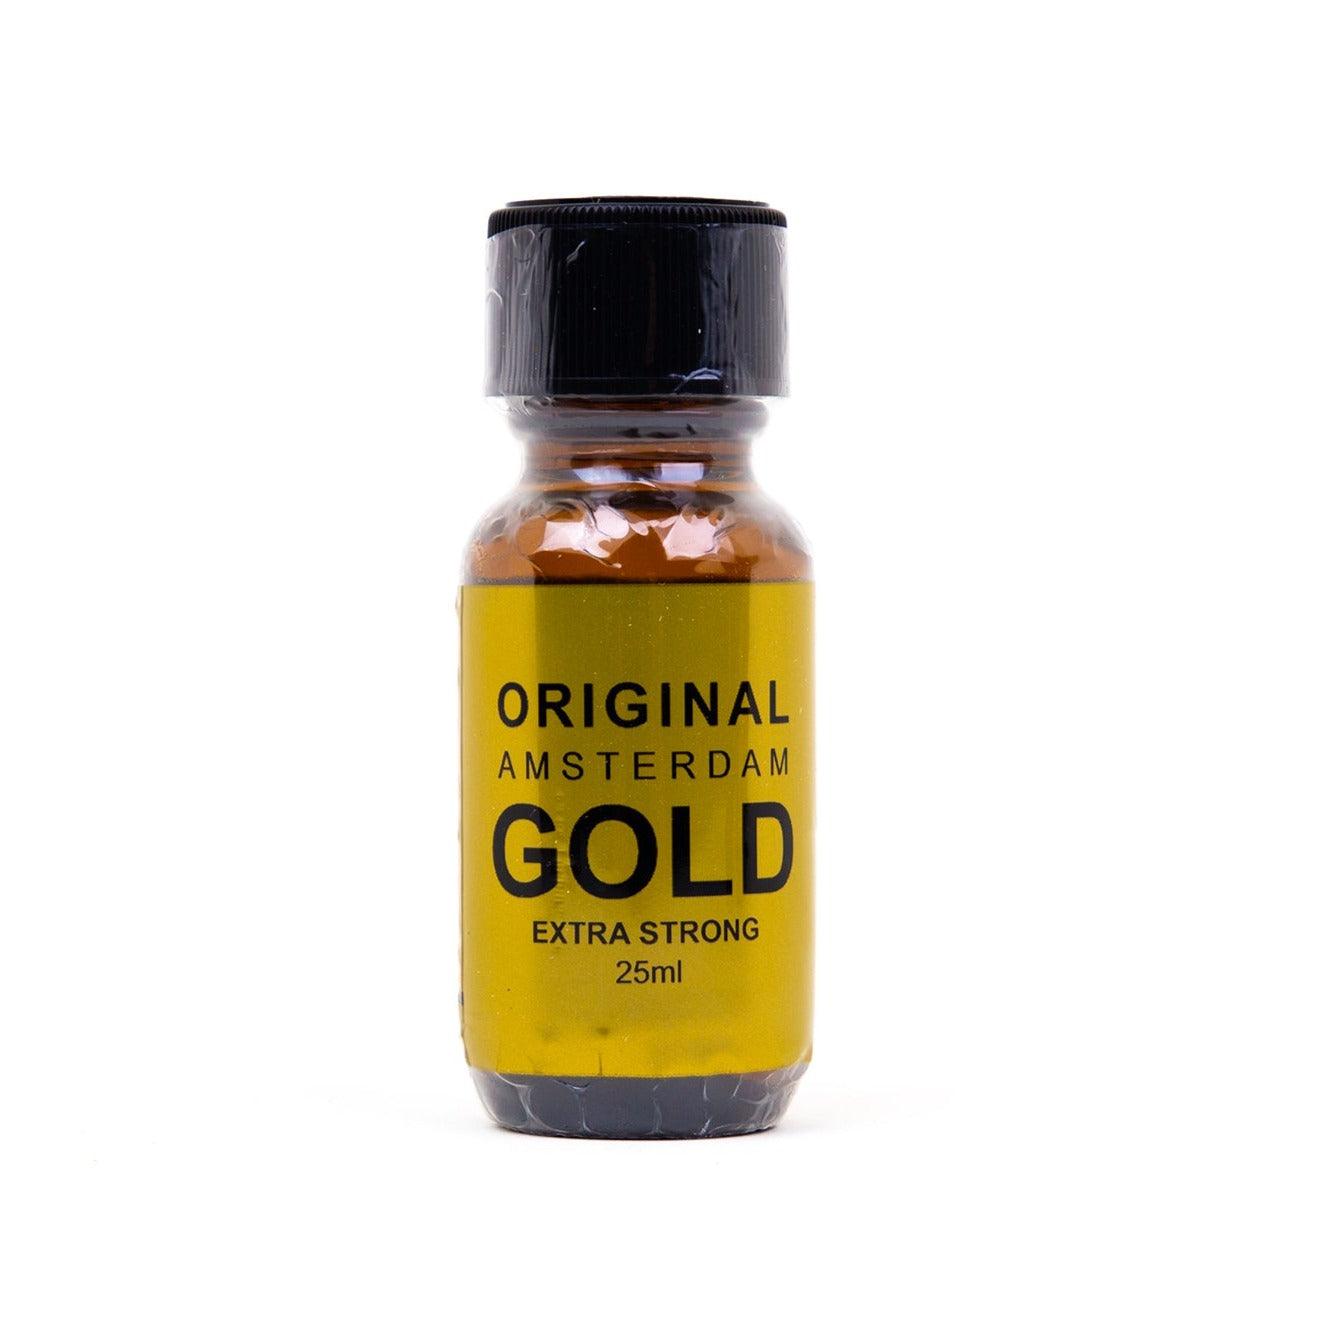 Original Amsterdam Gold, Extra Strong, 25ml by Amsterdam Gold